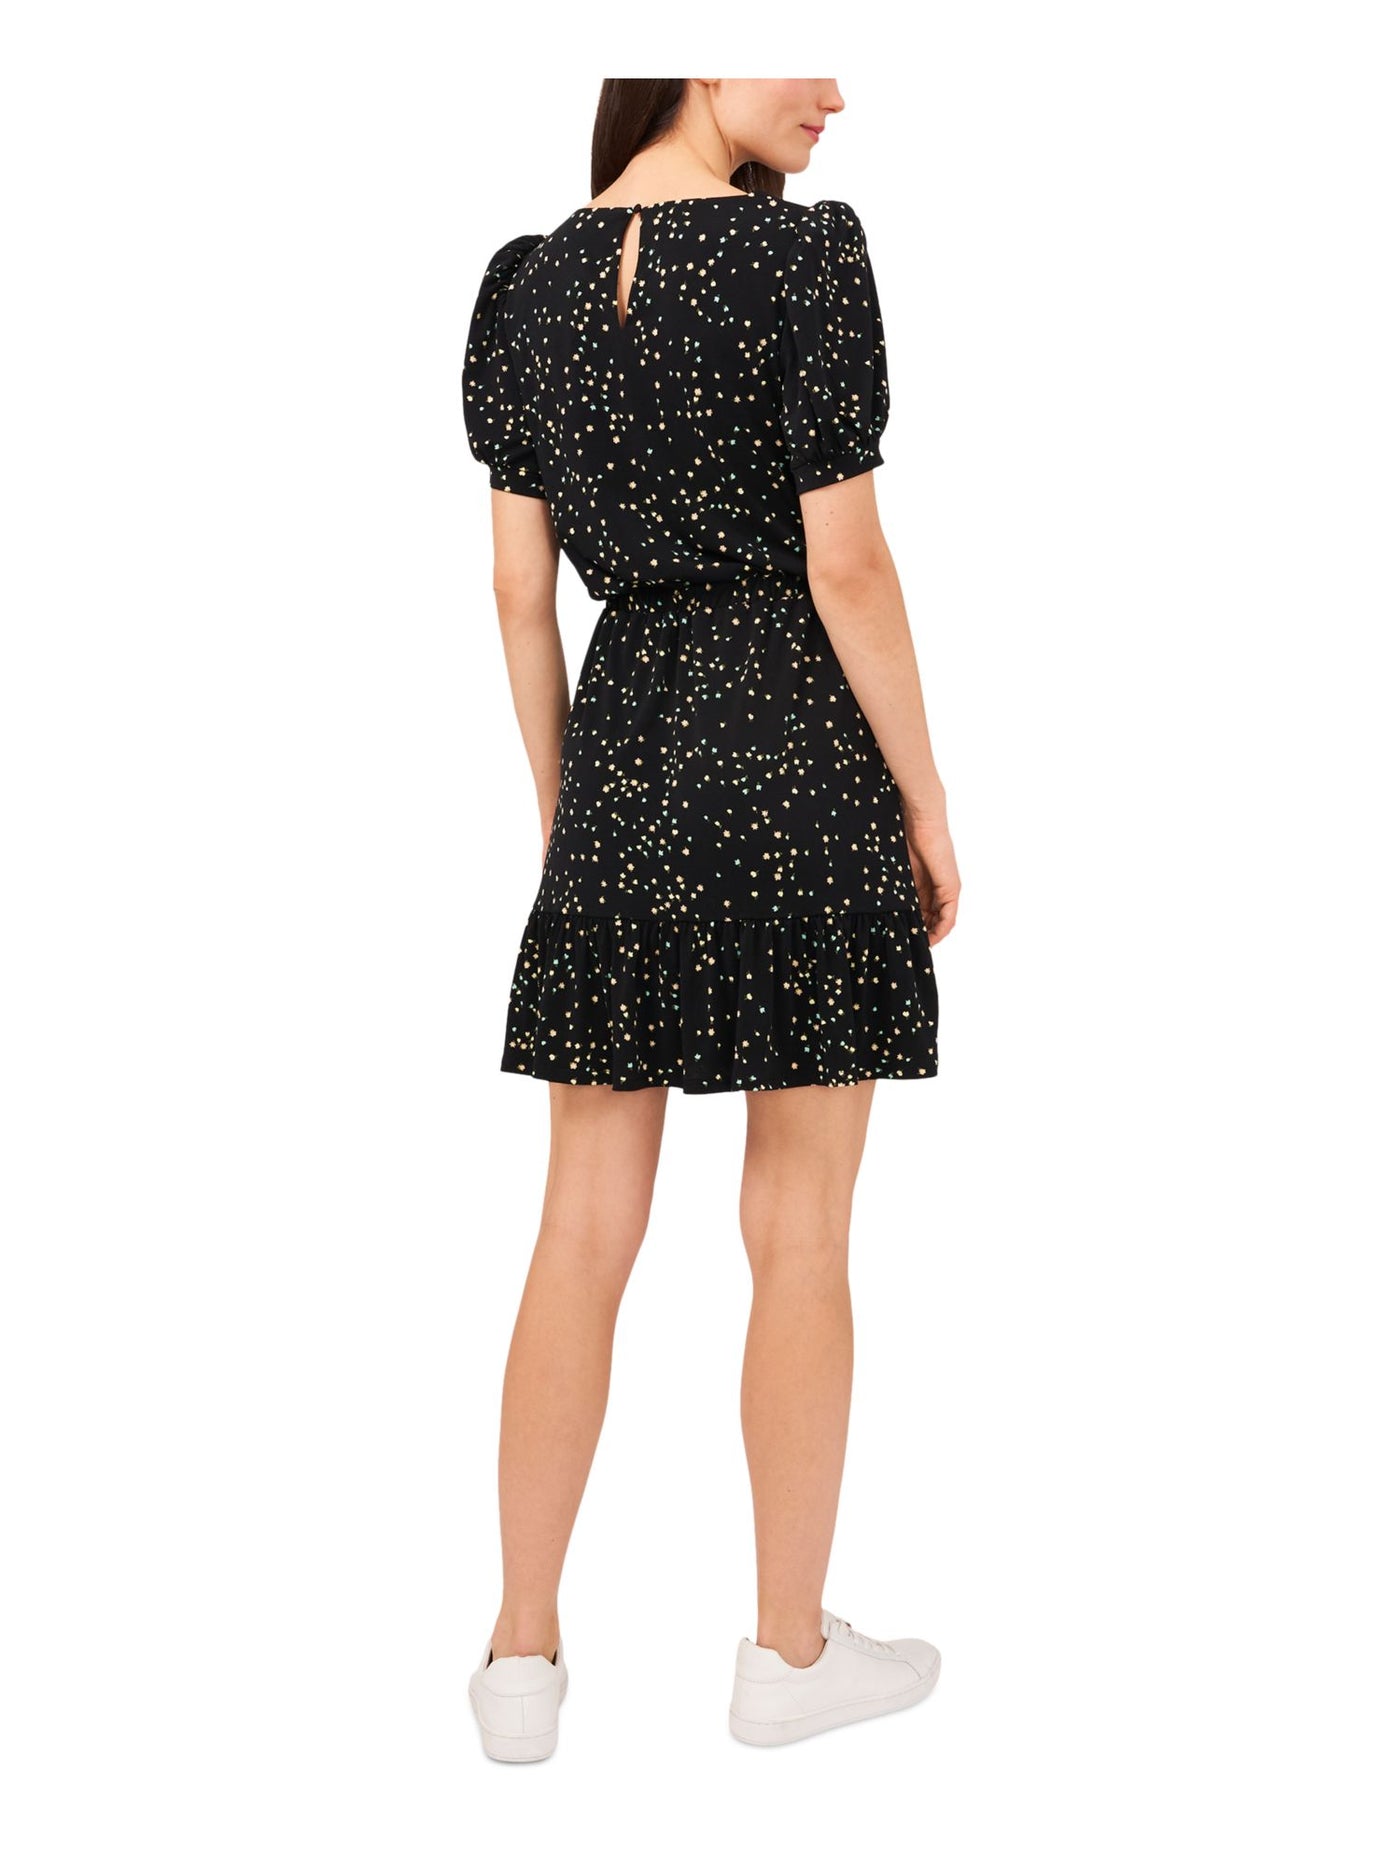 RILEY&RAE Womens Black Ruffled Lined Keyhole Back Elastic Waist Floral Short Sleeve Round Neck Above The Knee Fit + Flare Dress M